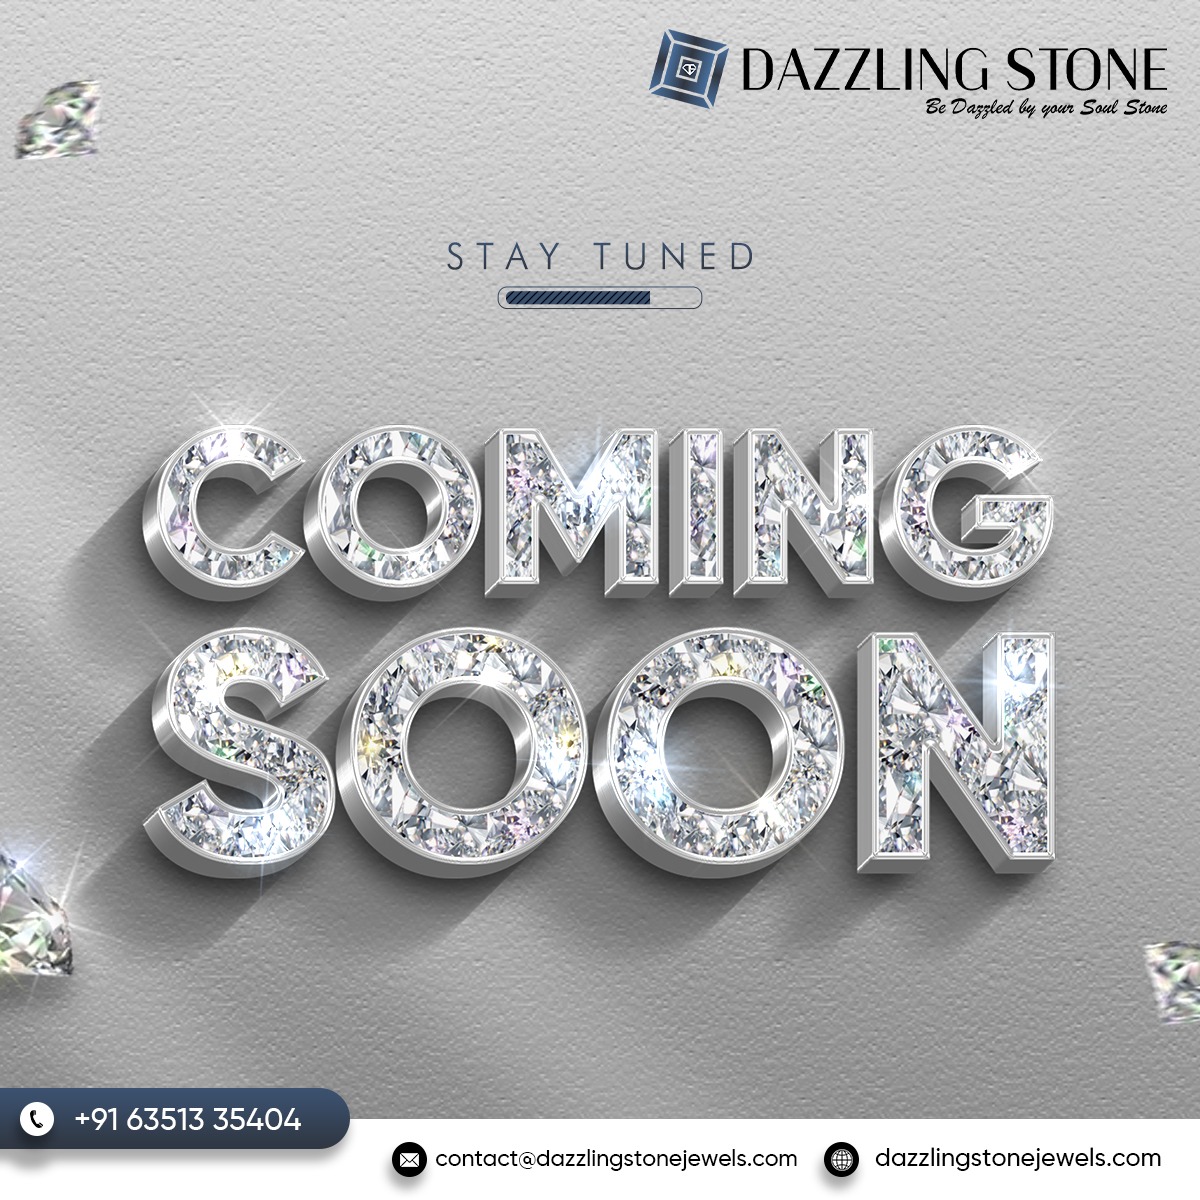 Get ready to be dazzled! Something sparkly is coming soon... #comingsoon #newarrivals #diamondjewelry